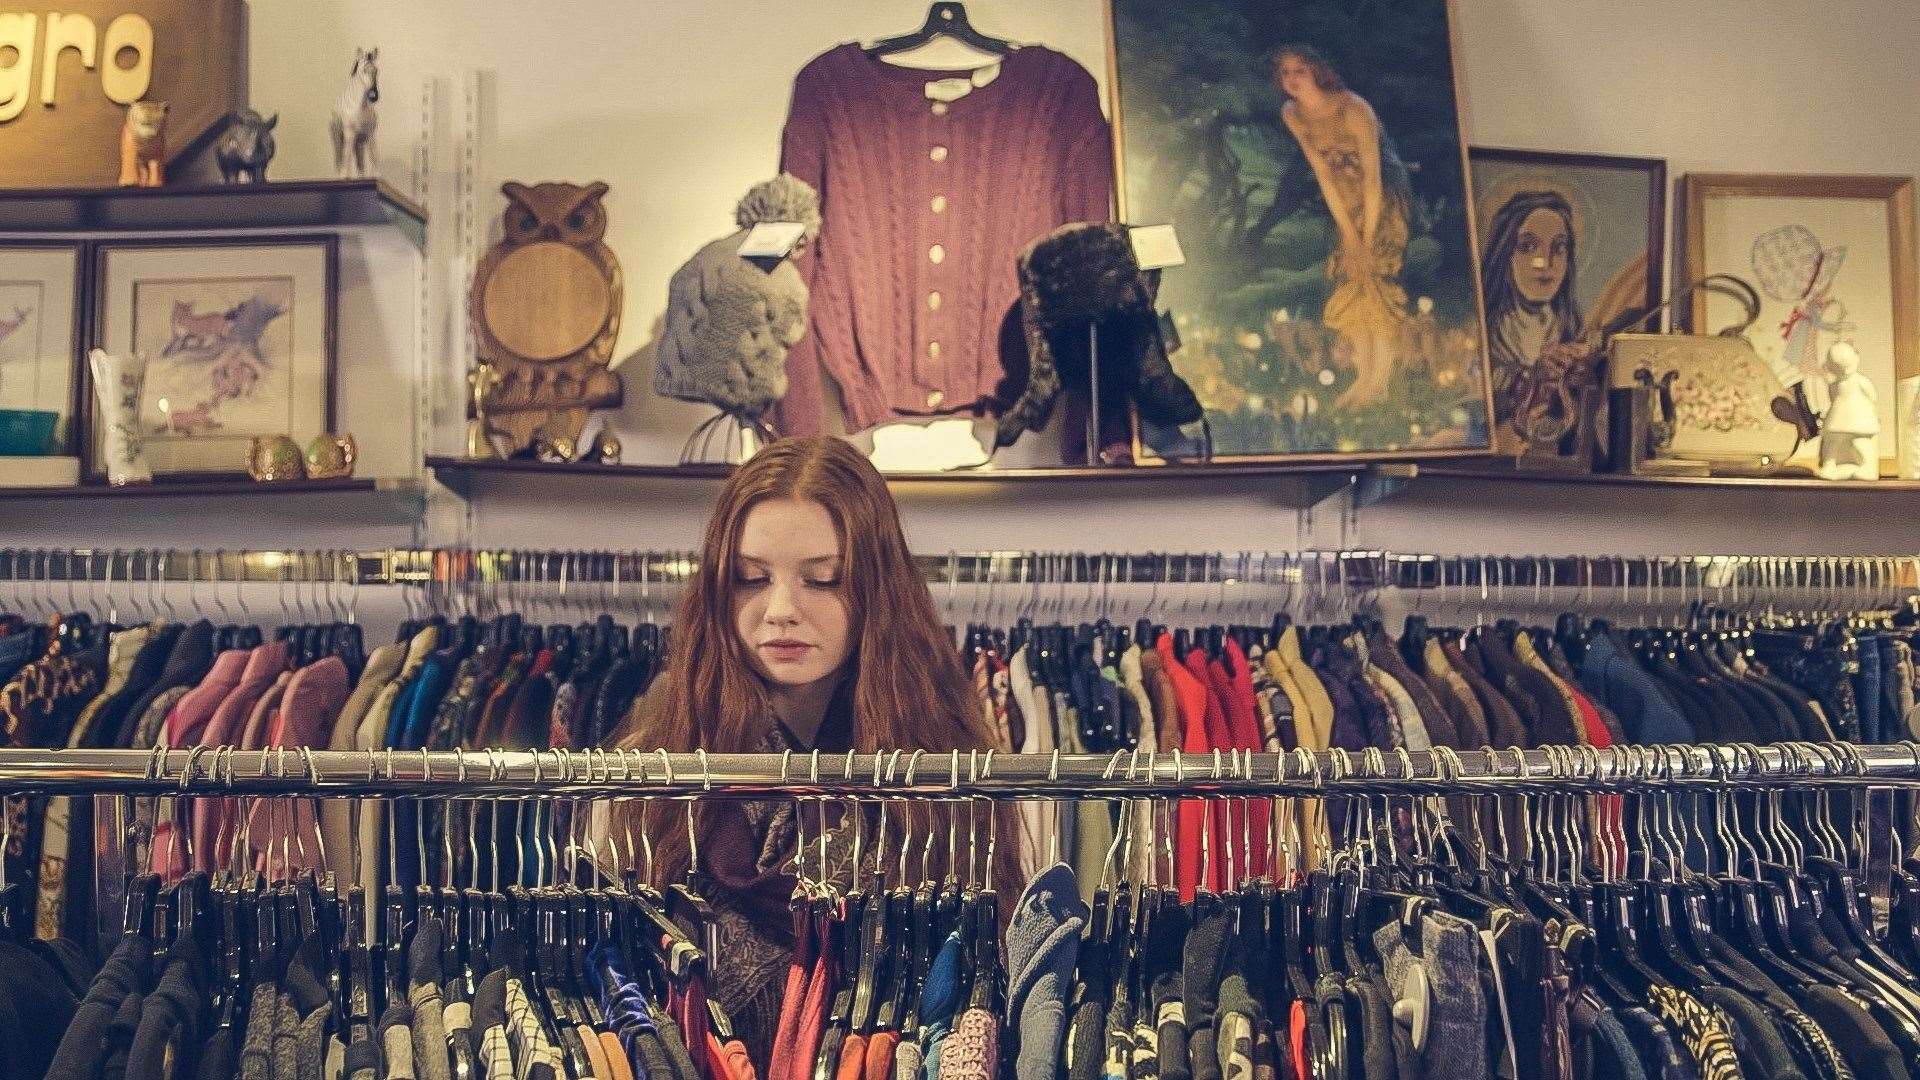 Shop out of season is among the tips. Photo: Stock image.